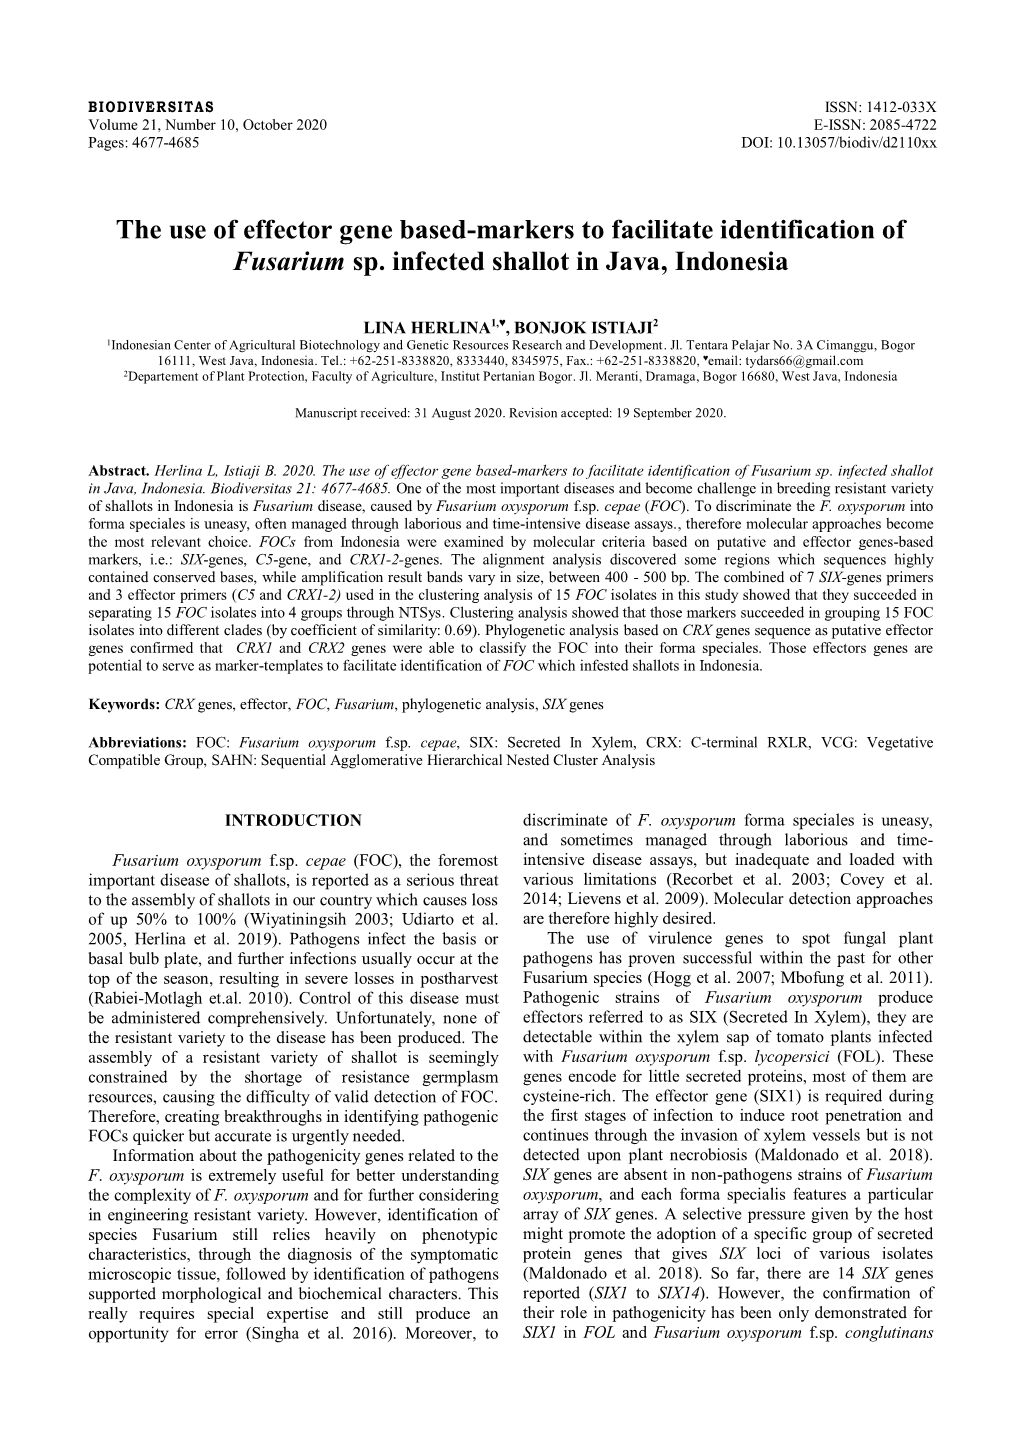 The Use of Effector Gene Based-Markers to Facilitate Identification of Fusarium Sp. Infected Shallot in Java, Indonesia